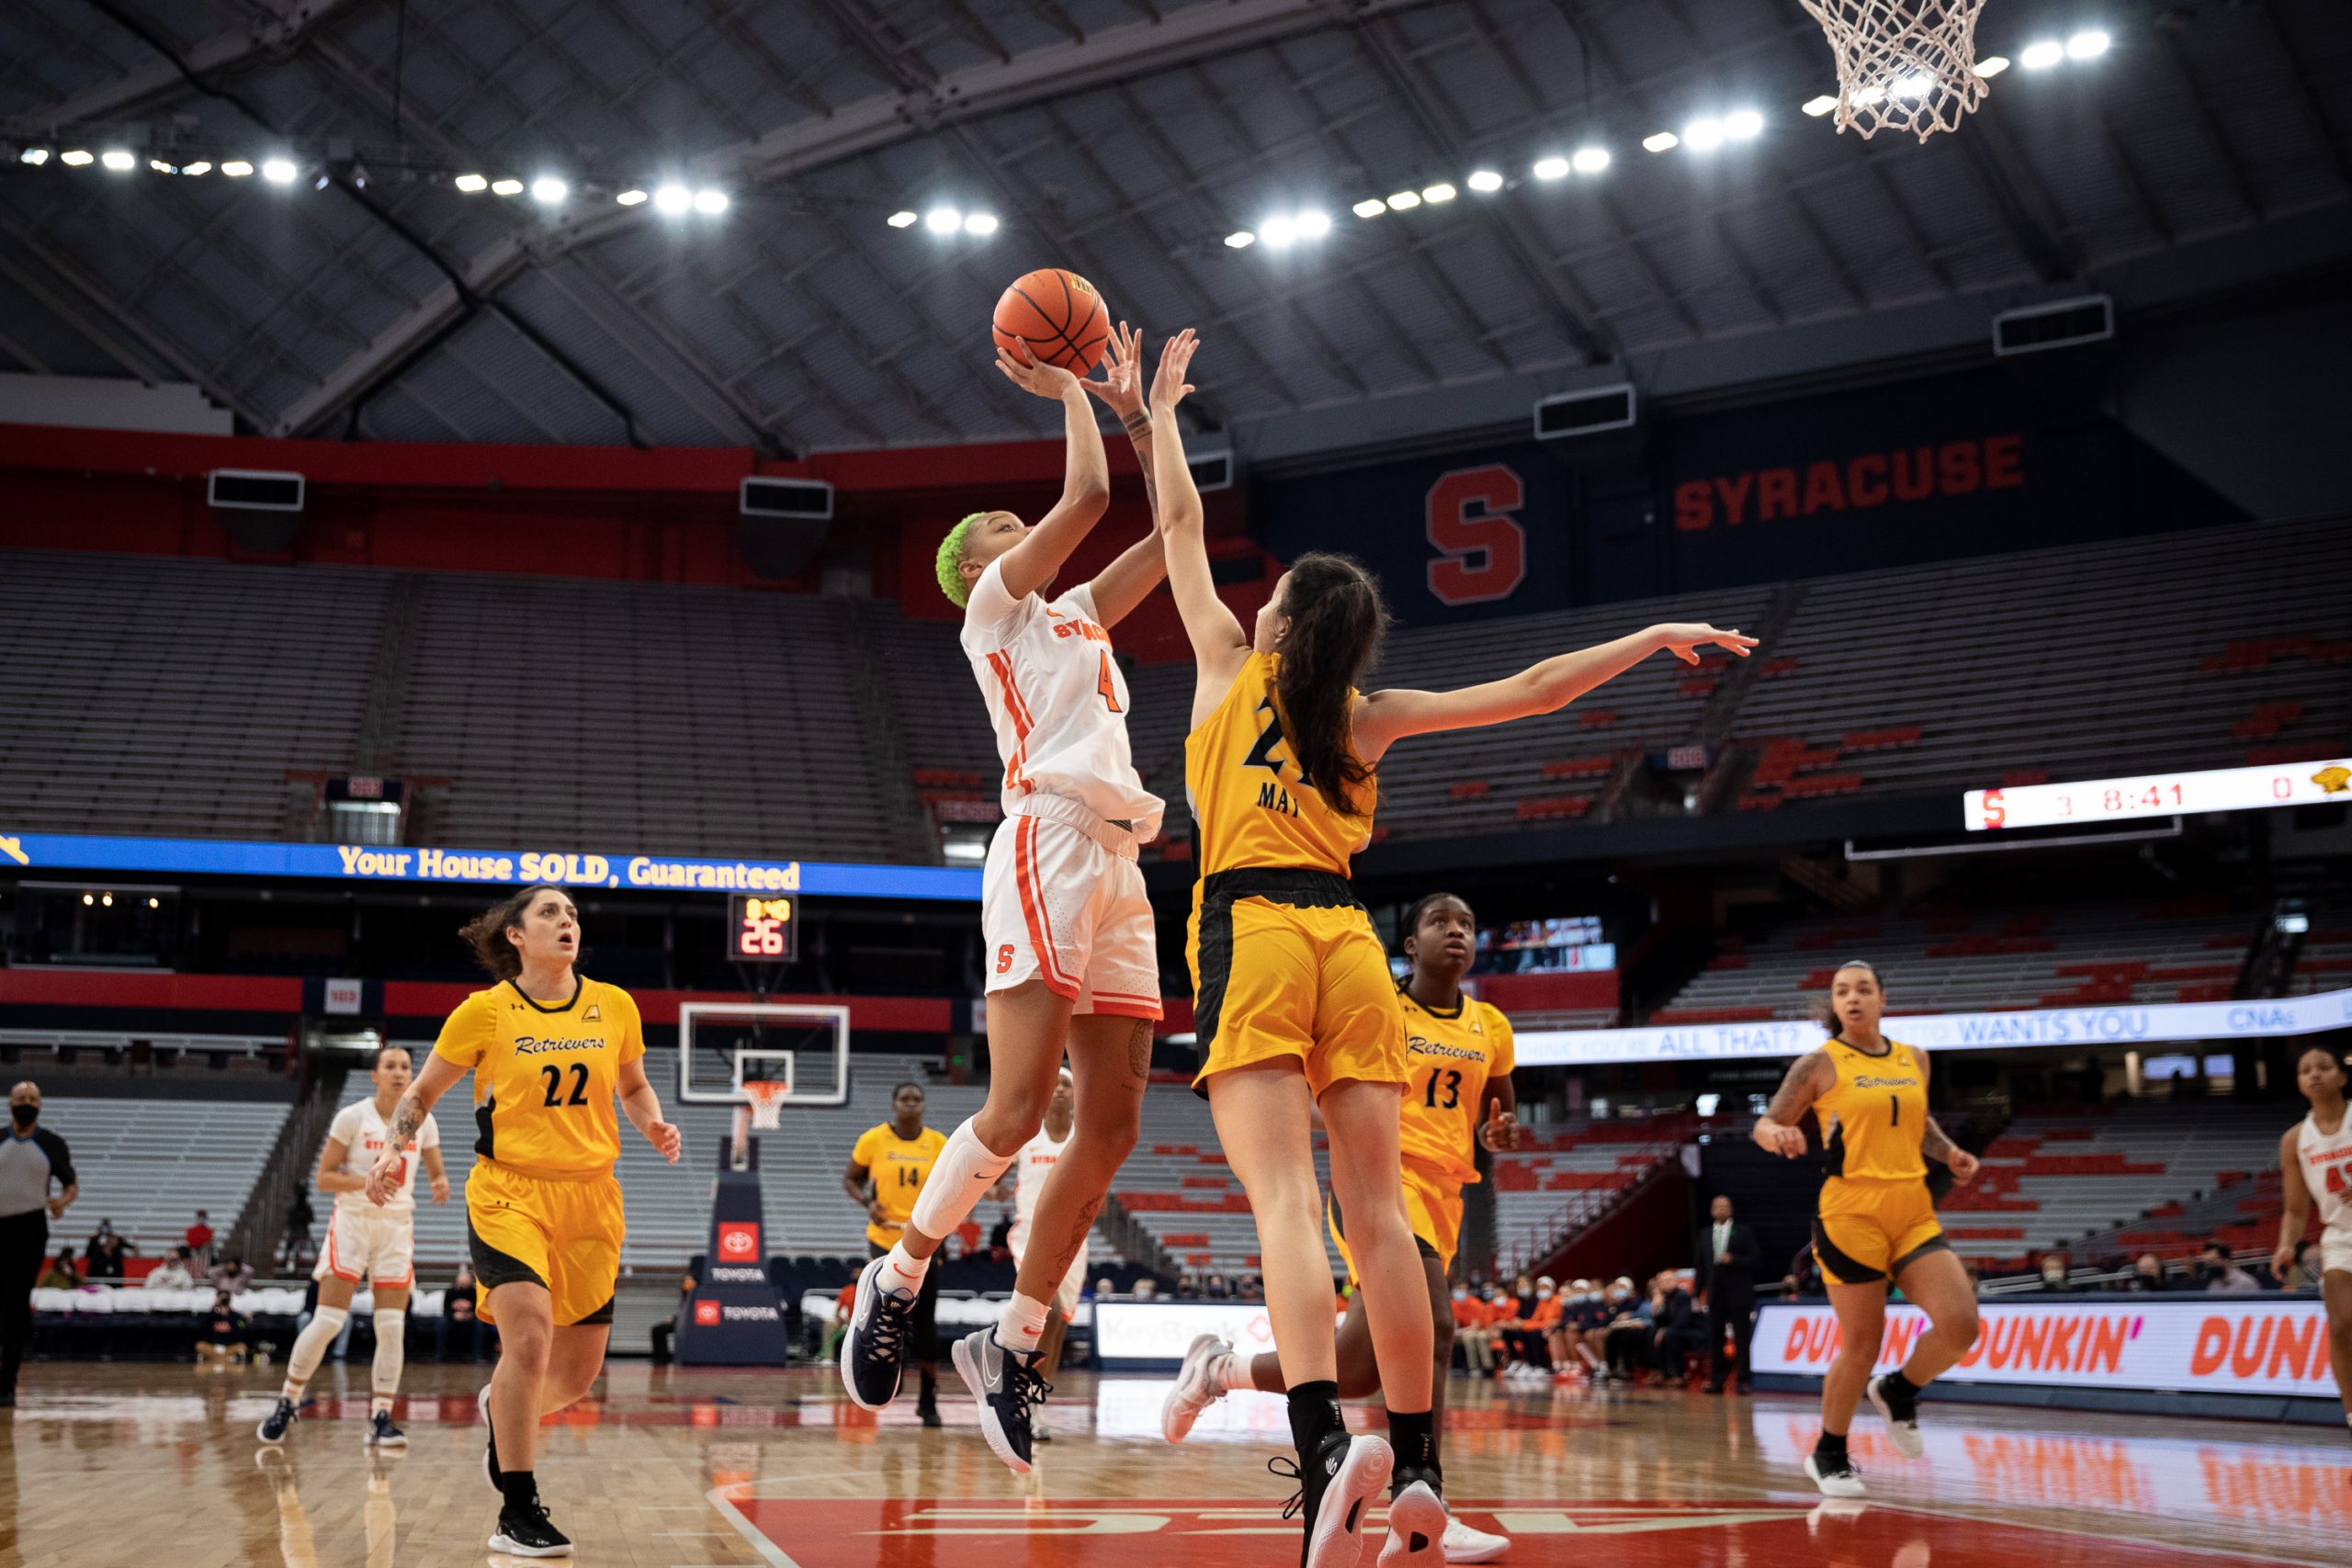 Alaysia Styles (4) rises above a UMBC defender in SU's win Saturday afternoon at The Dome.